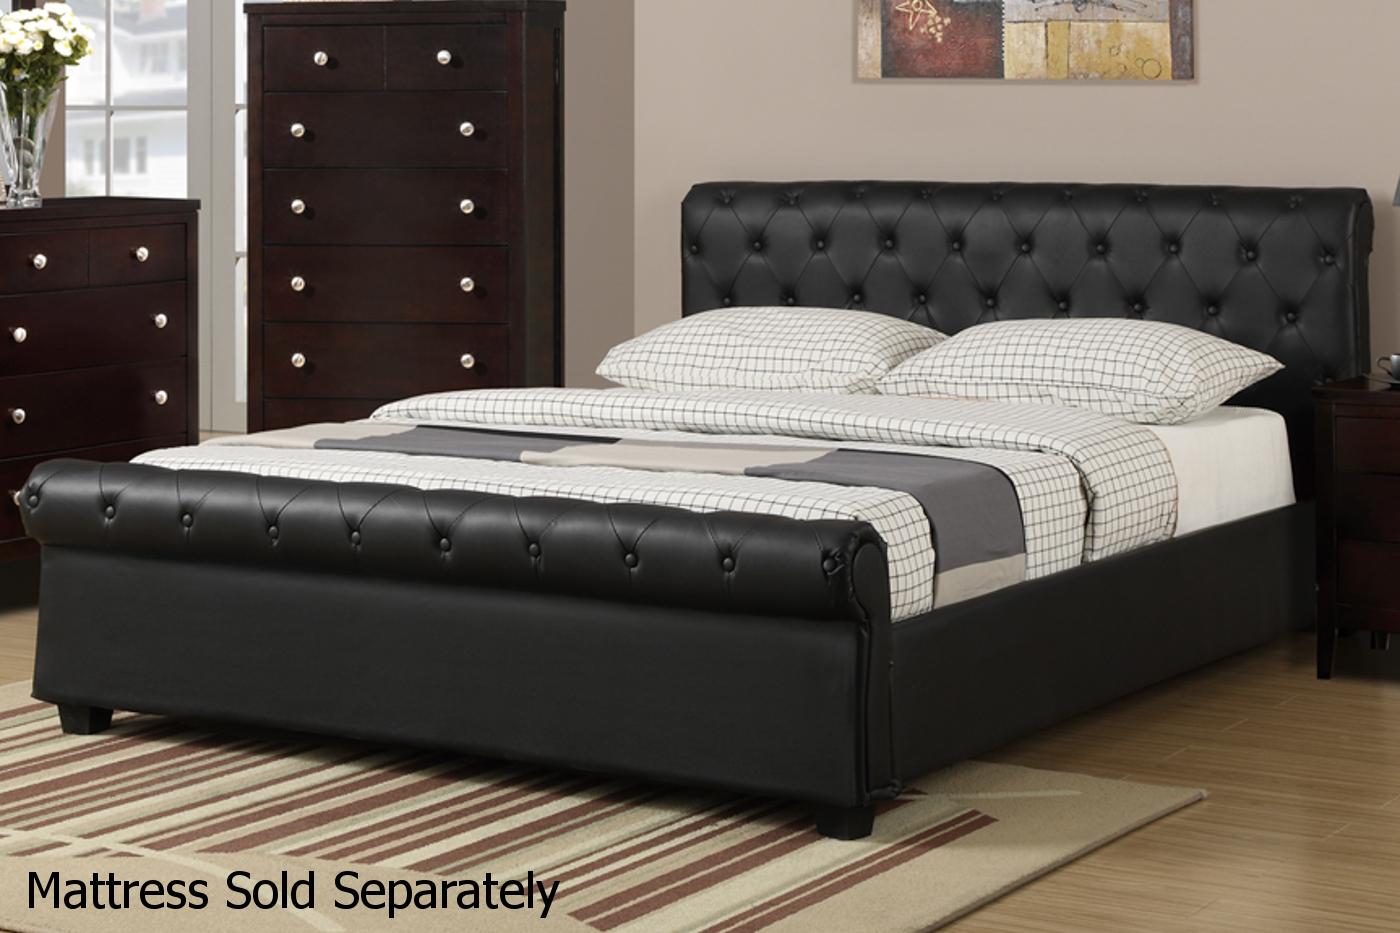 Black Leather Queen Size Bed - Steal-A-Sofa Furniture Outlet Los Angeles CA